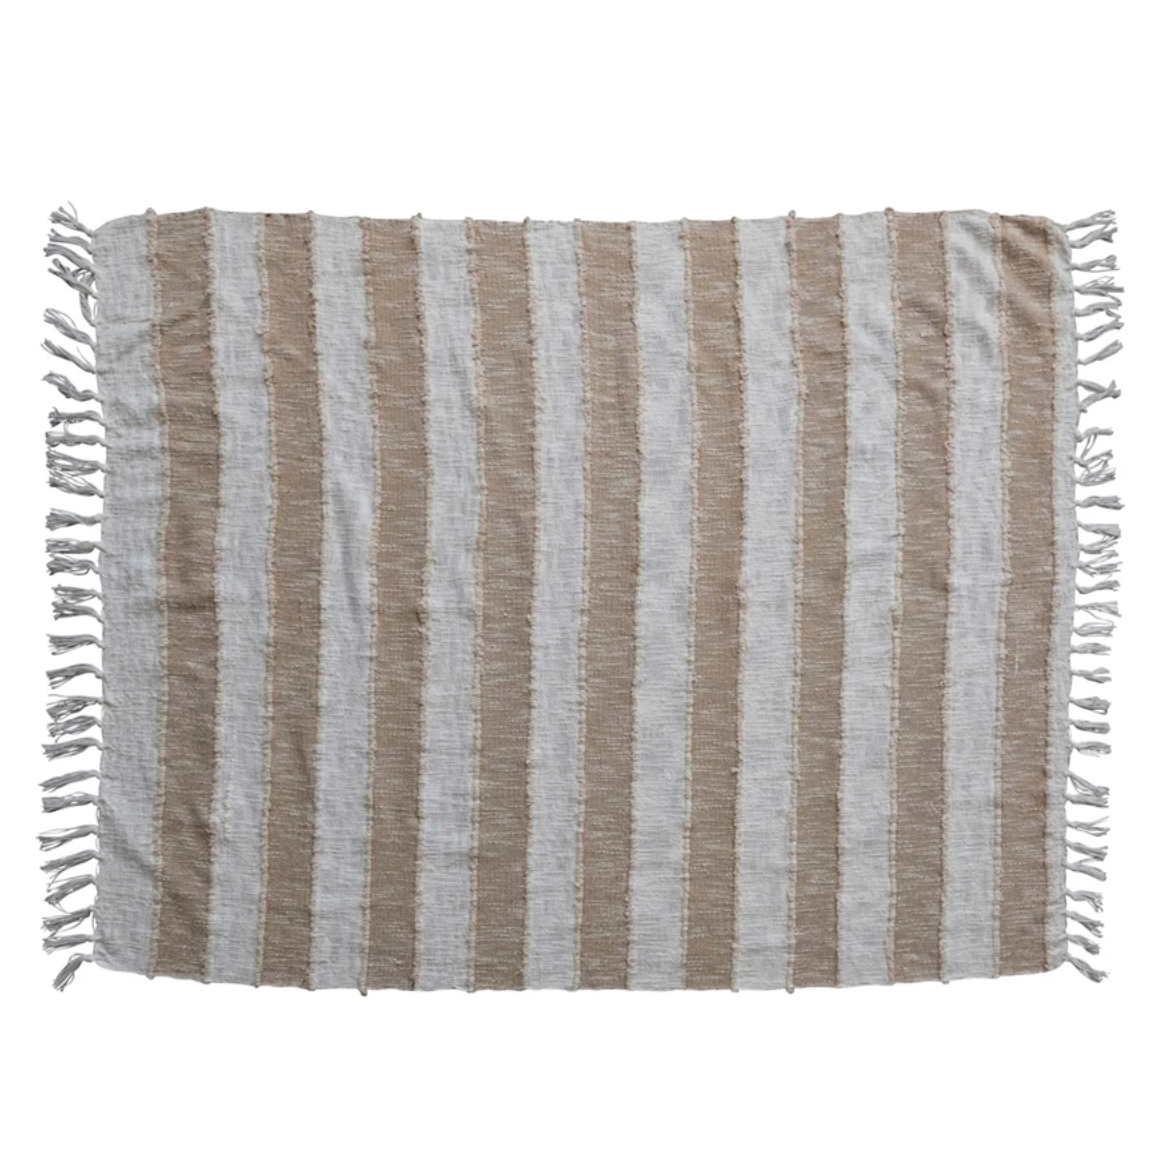 Woven Cotton Throw w/ Stripes & Fringe, Tan Color & Natural